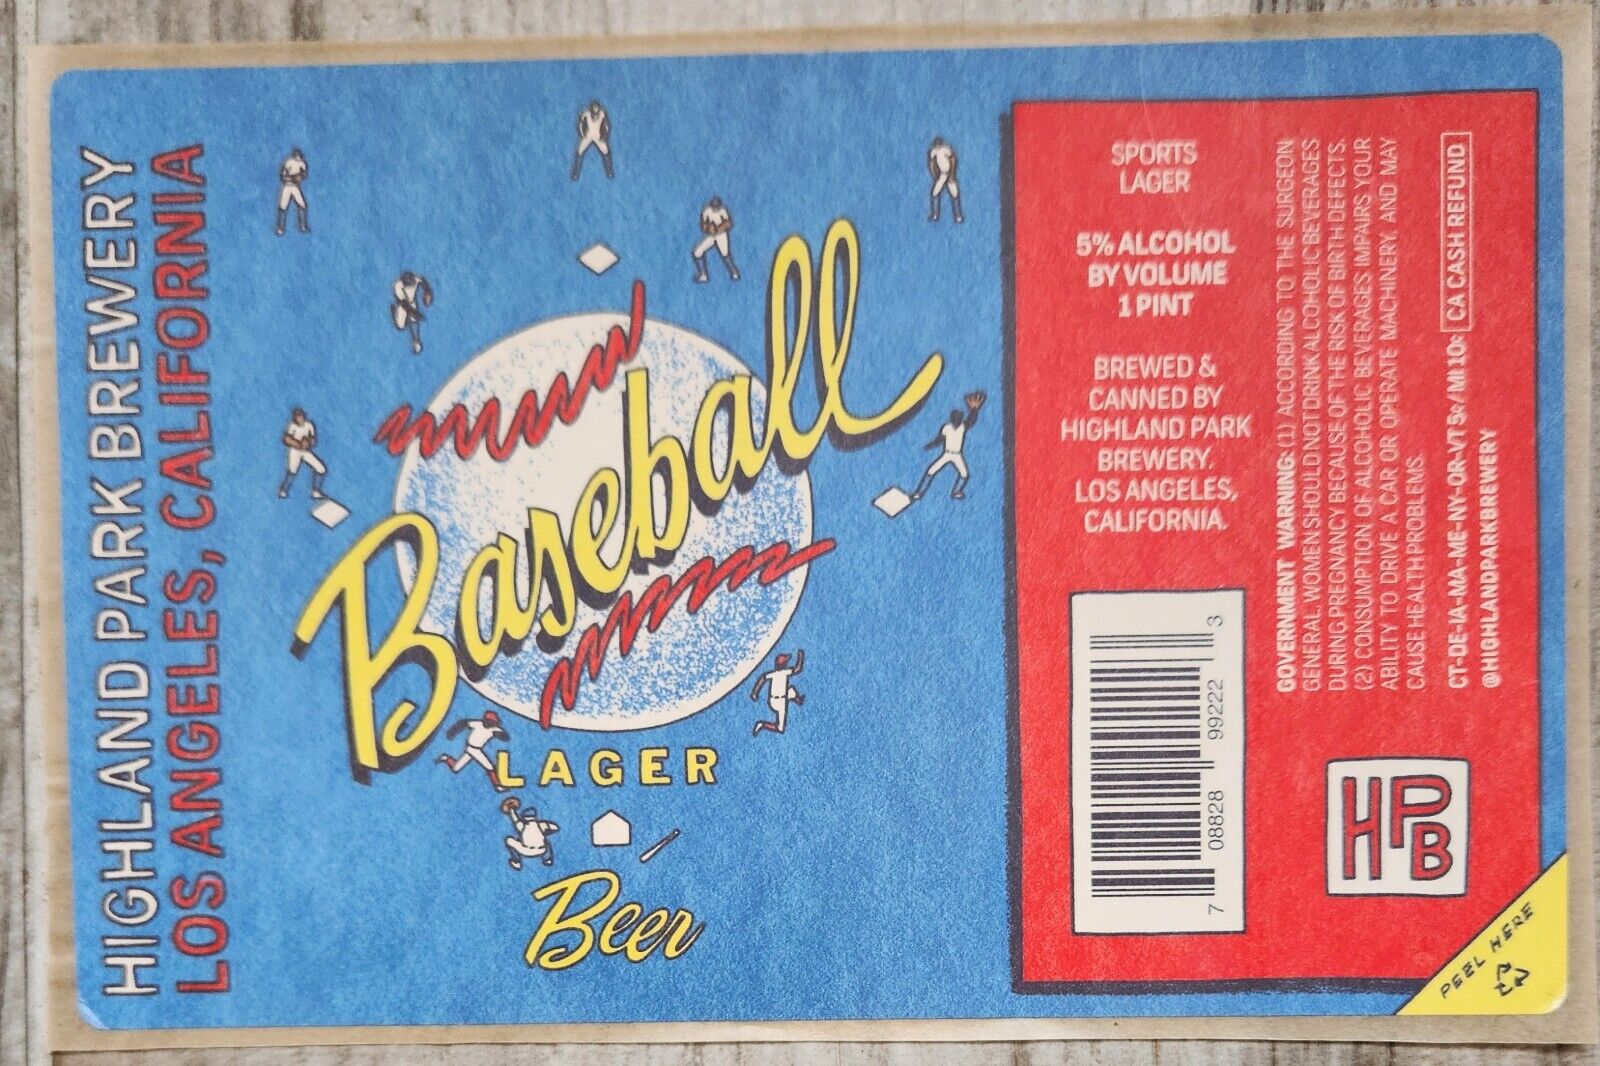 Highland Park Brewing Baseball Lager Beer Collectible Beer Sticker Label 